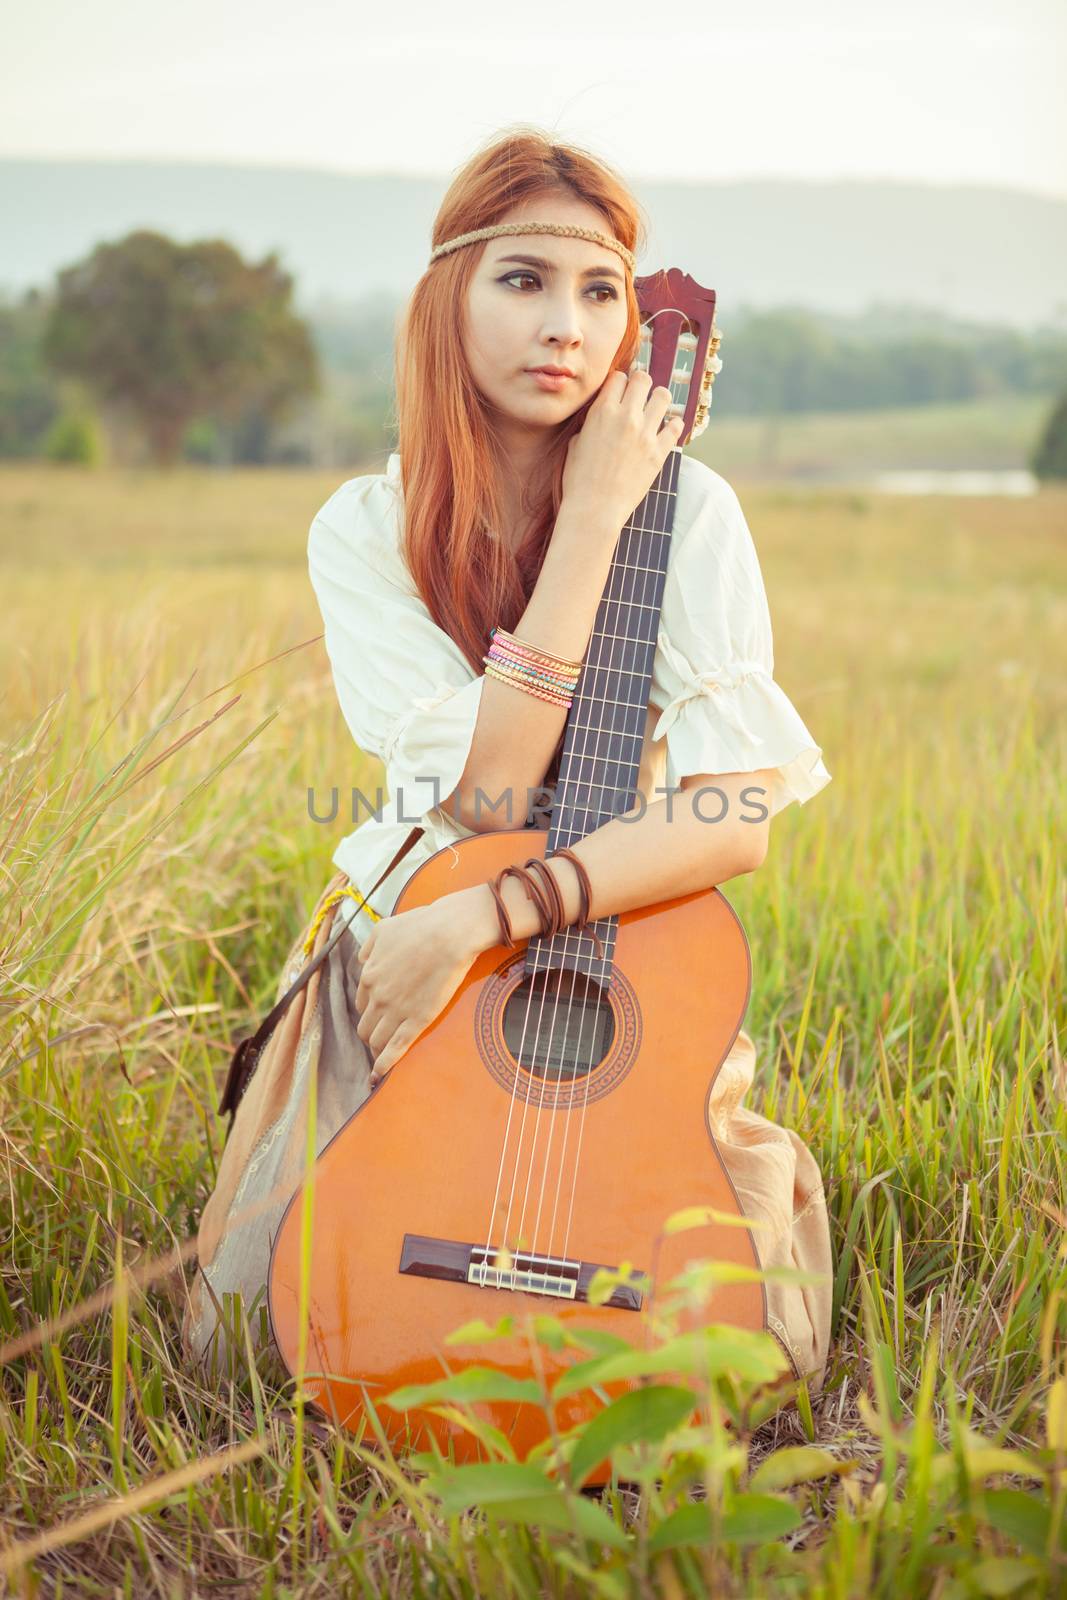 Pretty country hippie girl playing guitar on grass